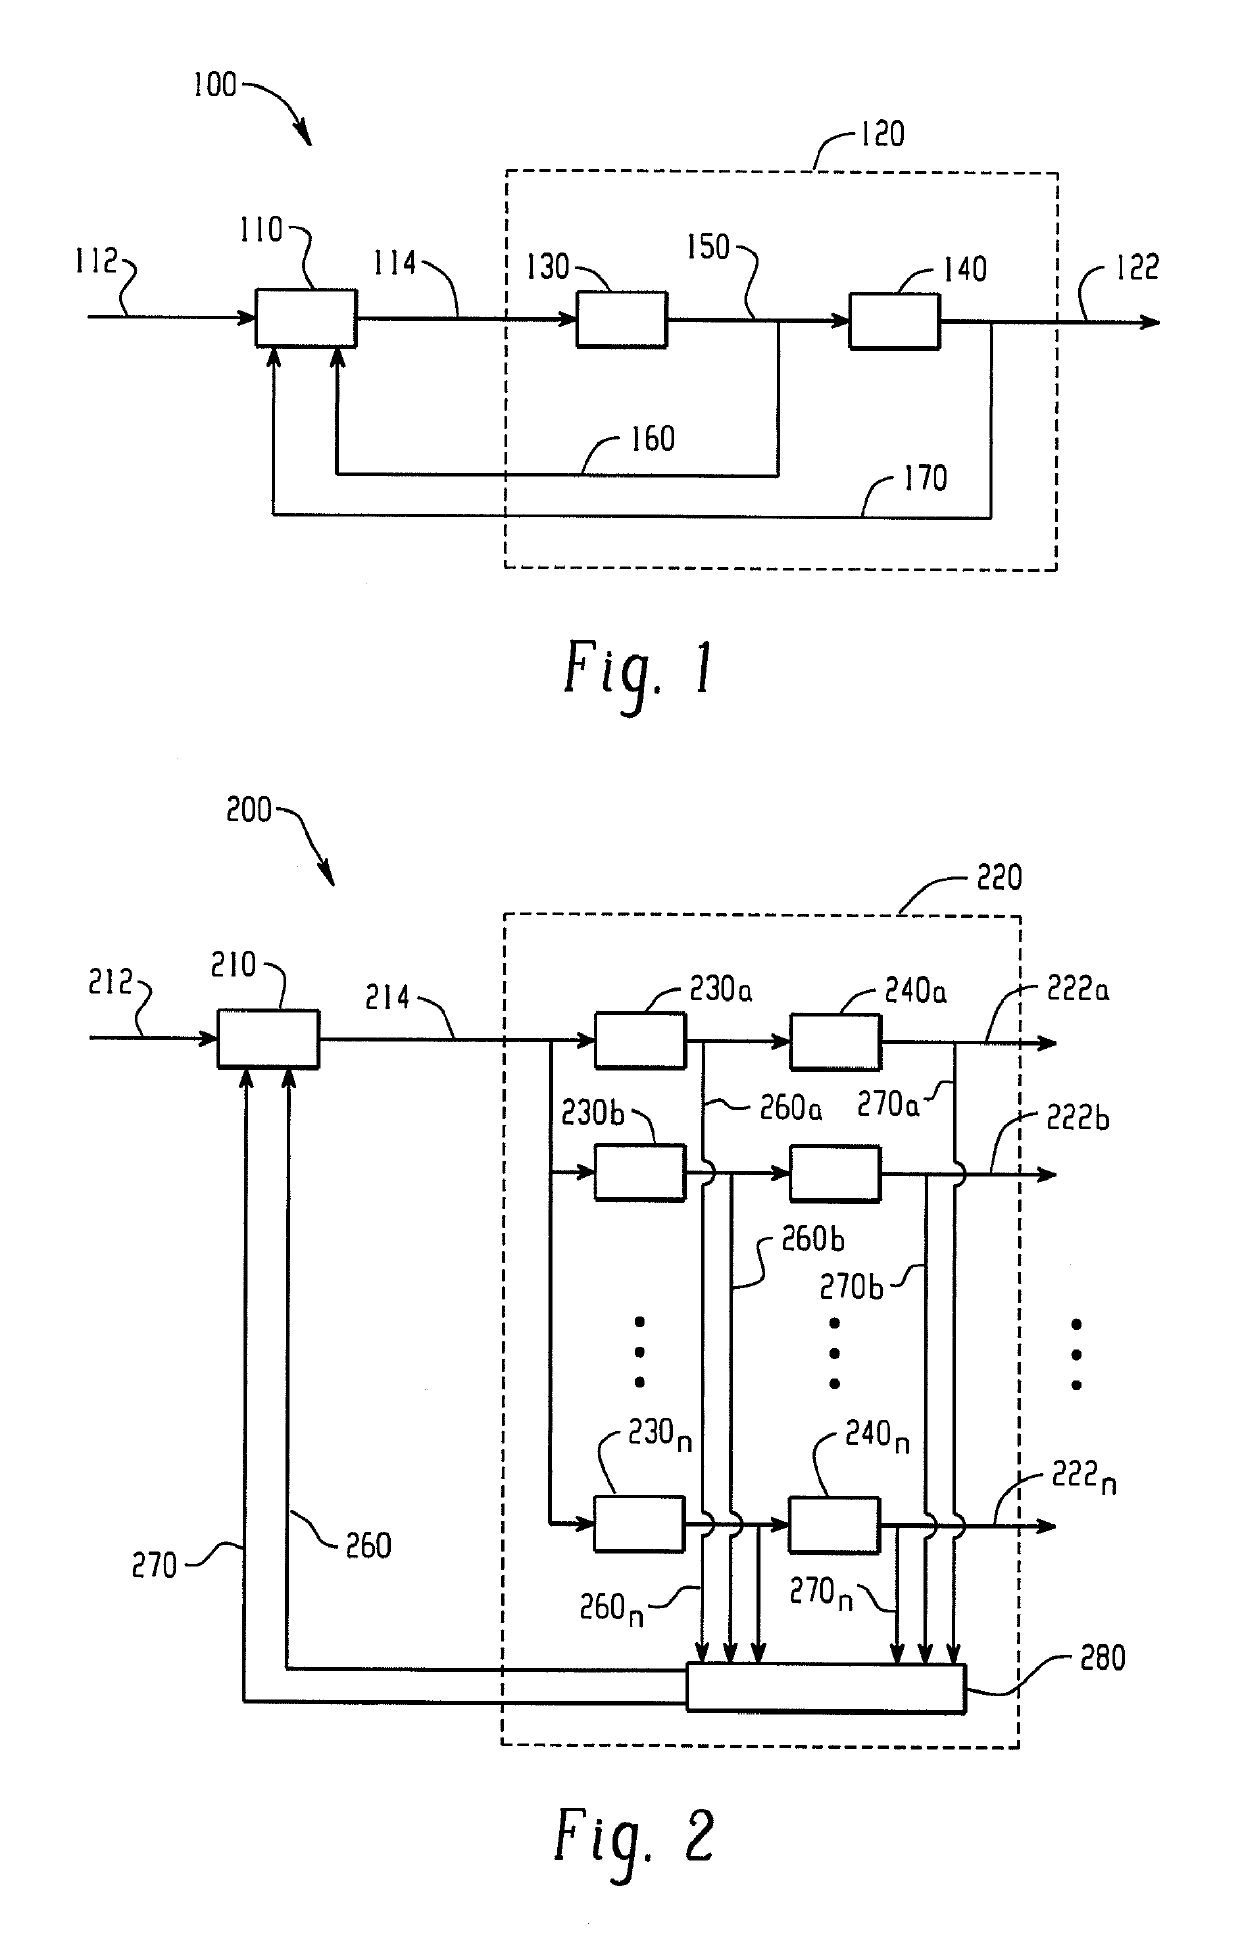 Hydromechanical pressure compensation control of a variable displacement pump in a centrifugal pumping and metering system and associated method